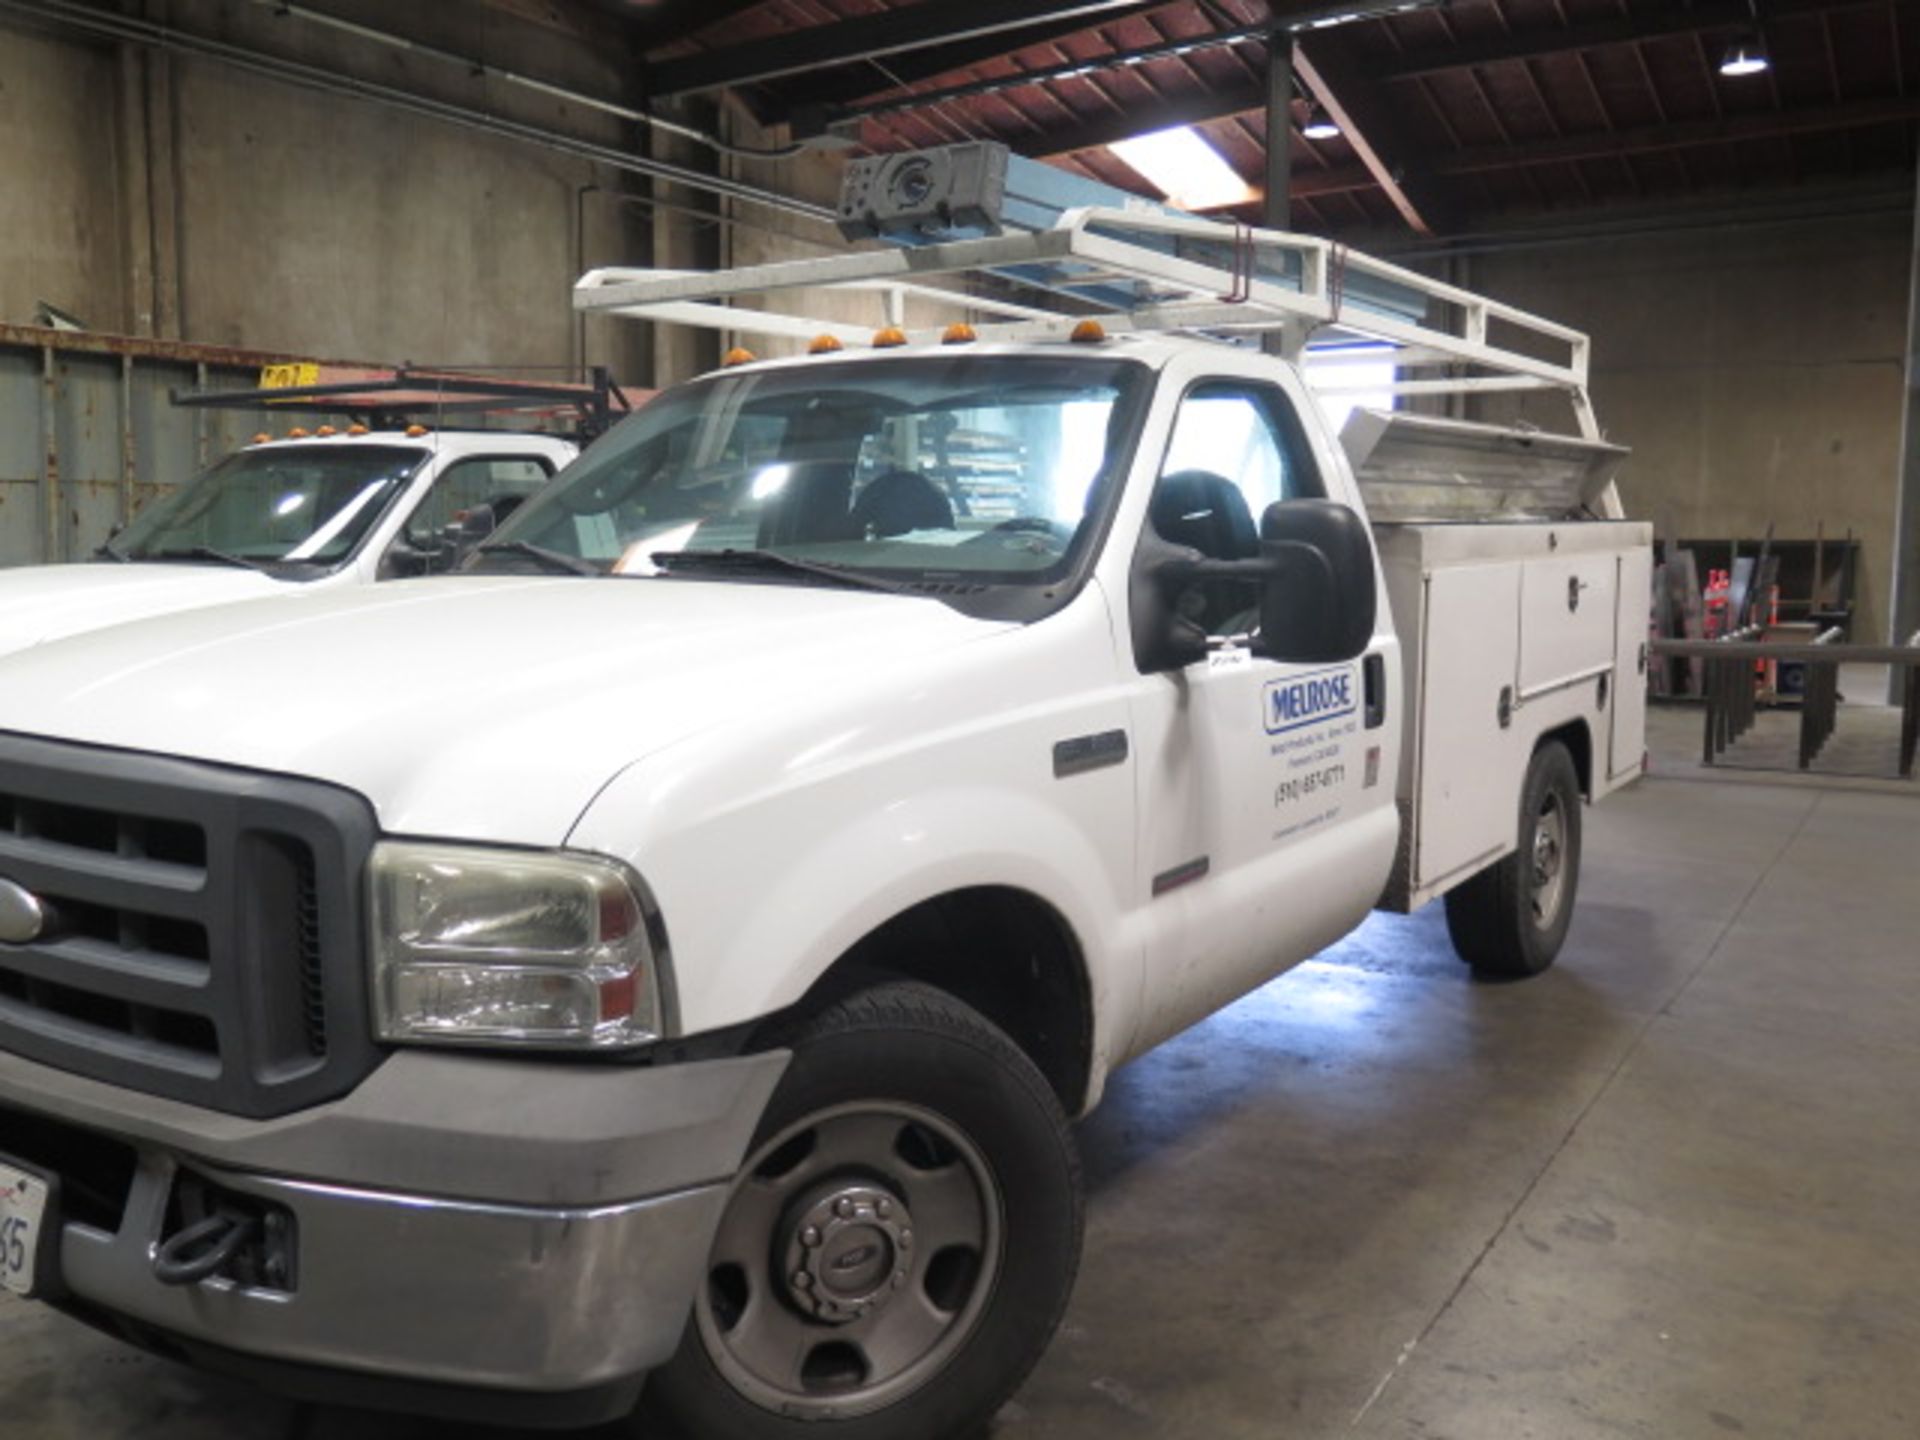 2005 Ford F-350 Service Truck Lisc 7N38165 w/ 6.0L V8 Turbo Diesel Engine, Auto Trans, SOLD AS IS